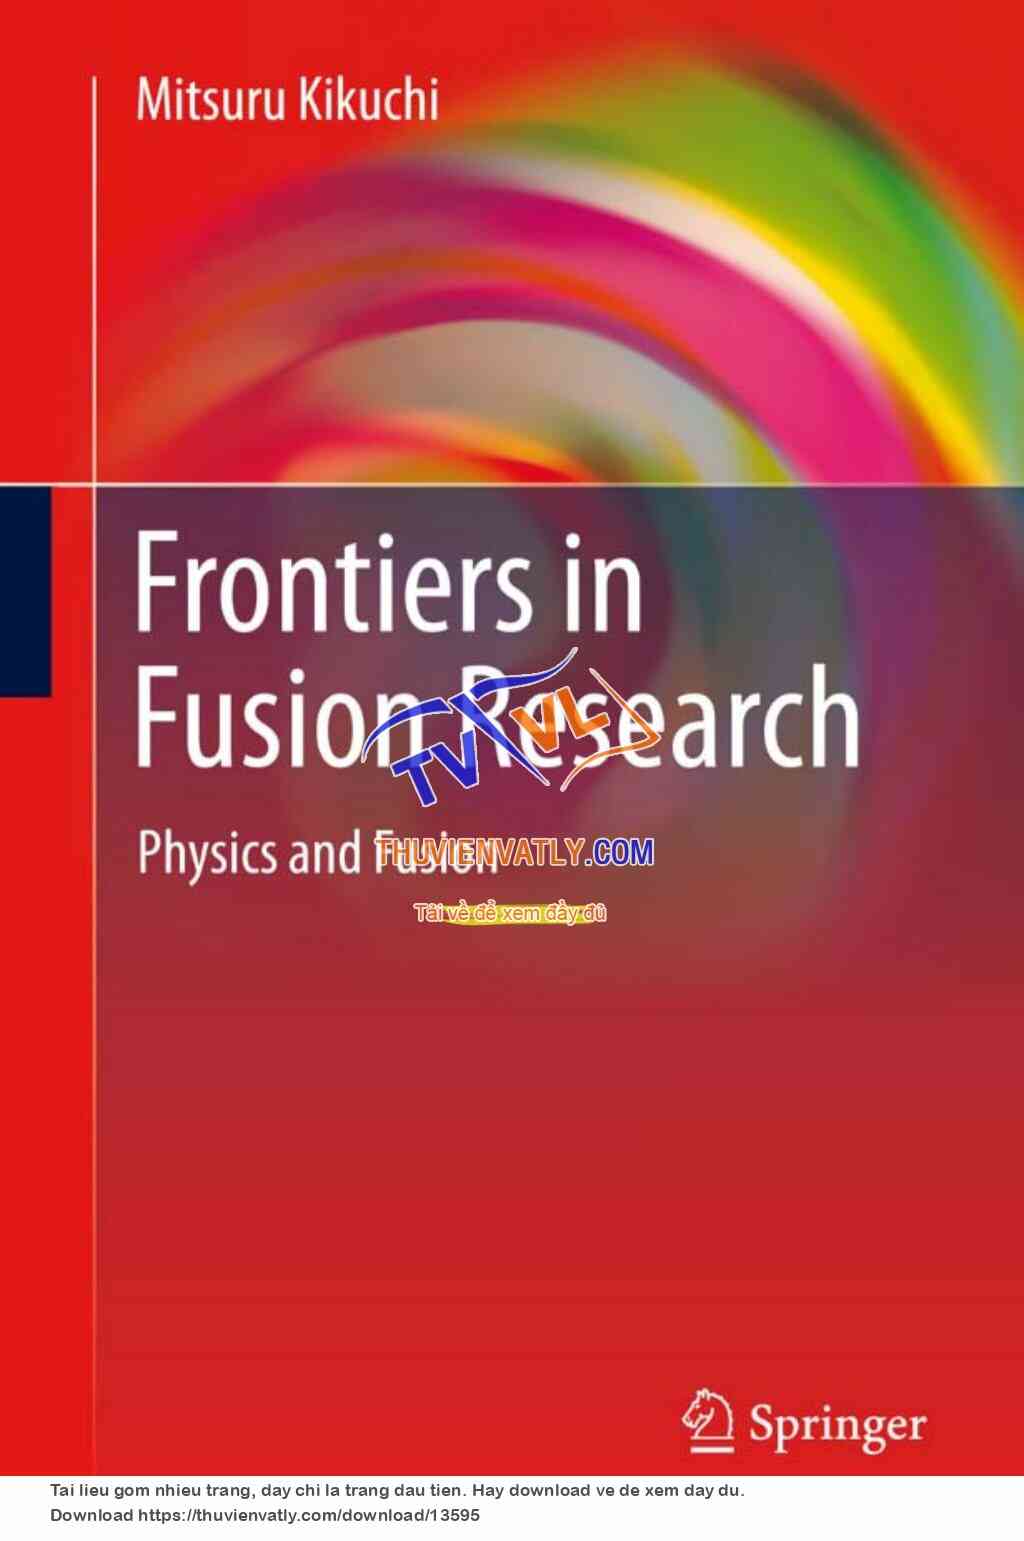 Frontiers in Fusion Research - Physics and Fusion - M. Kikuchi (Springer, 2011)